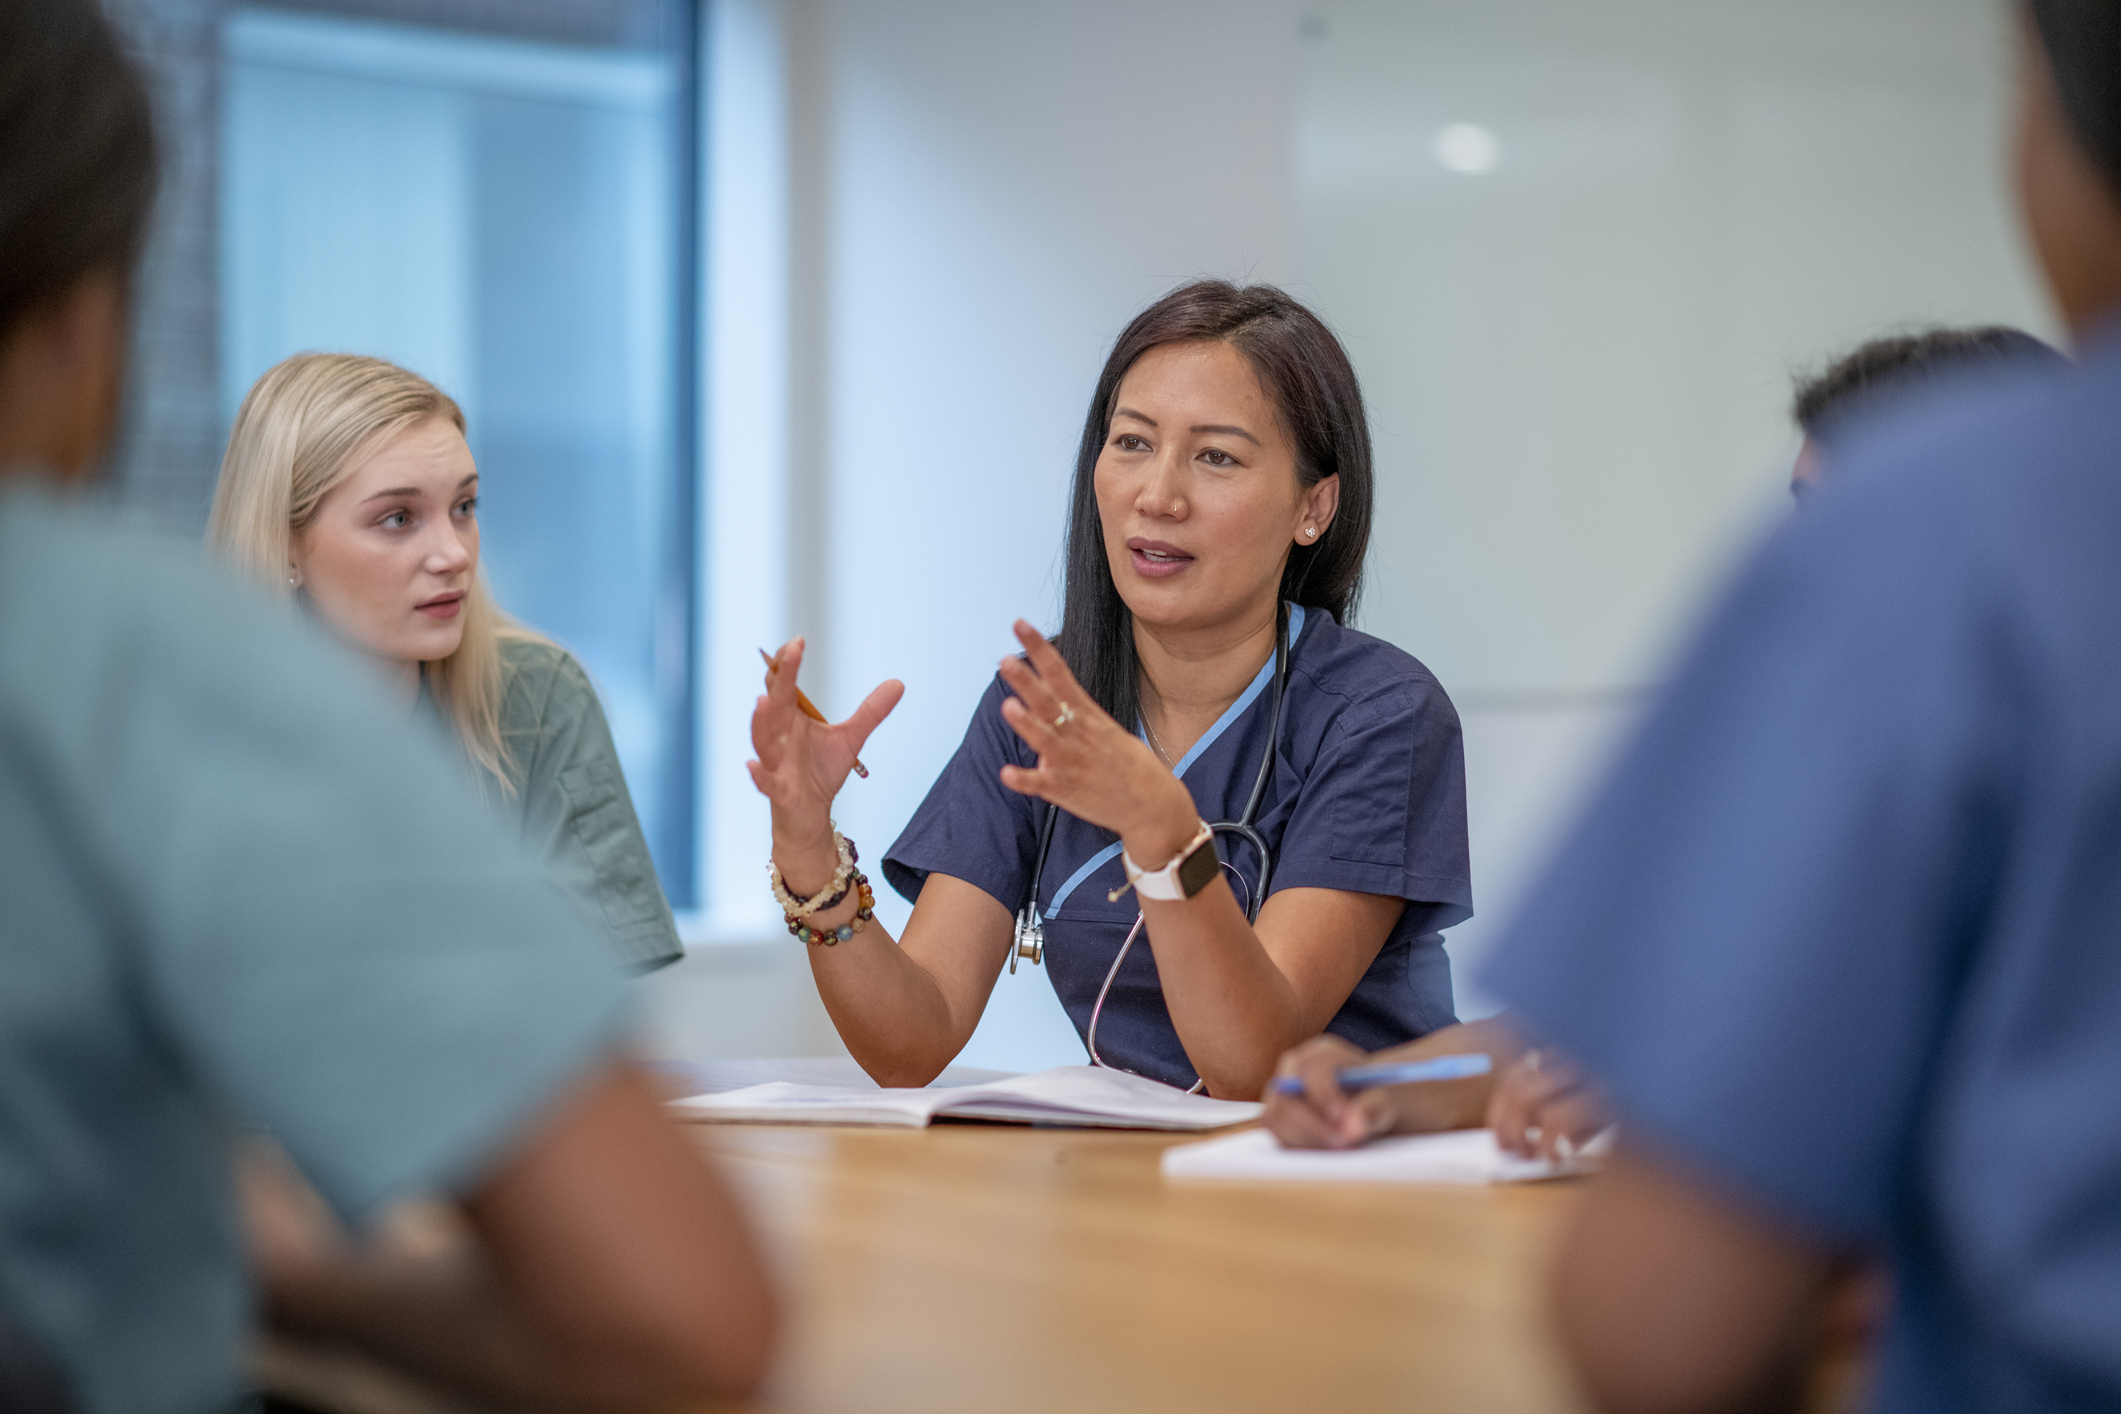 A small group of Nurse sit at a boardroom table as they meet to discuss patient cases. They are each dressed professionally in scrubs and have stethoscopes around their necks as they discuss plans of care for each case.